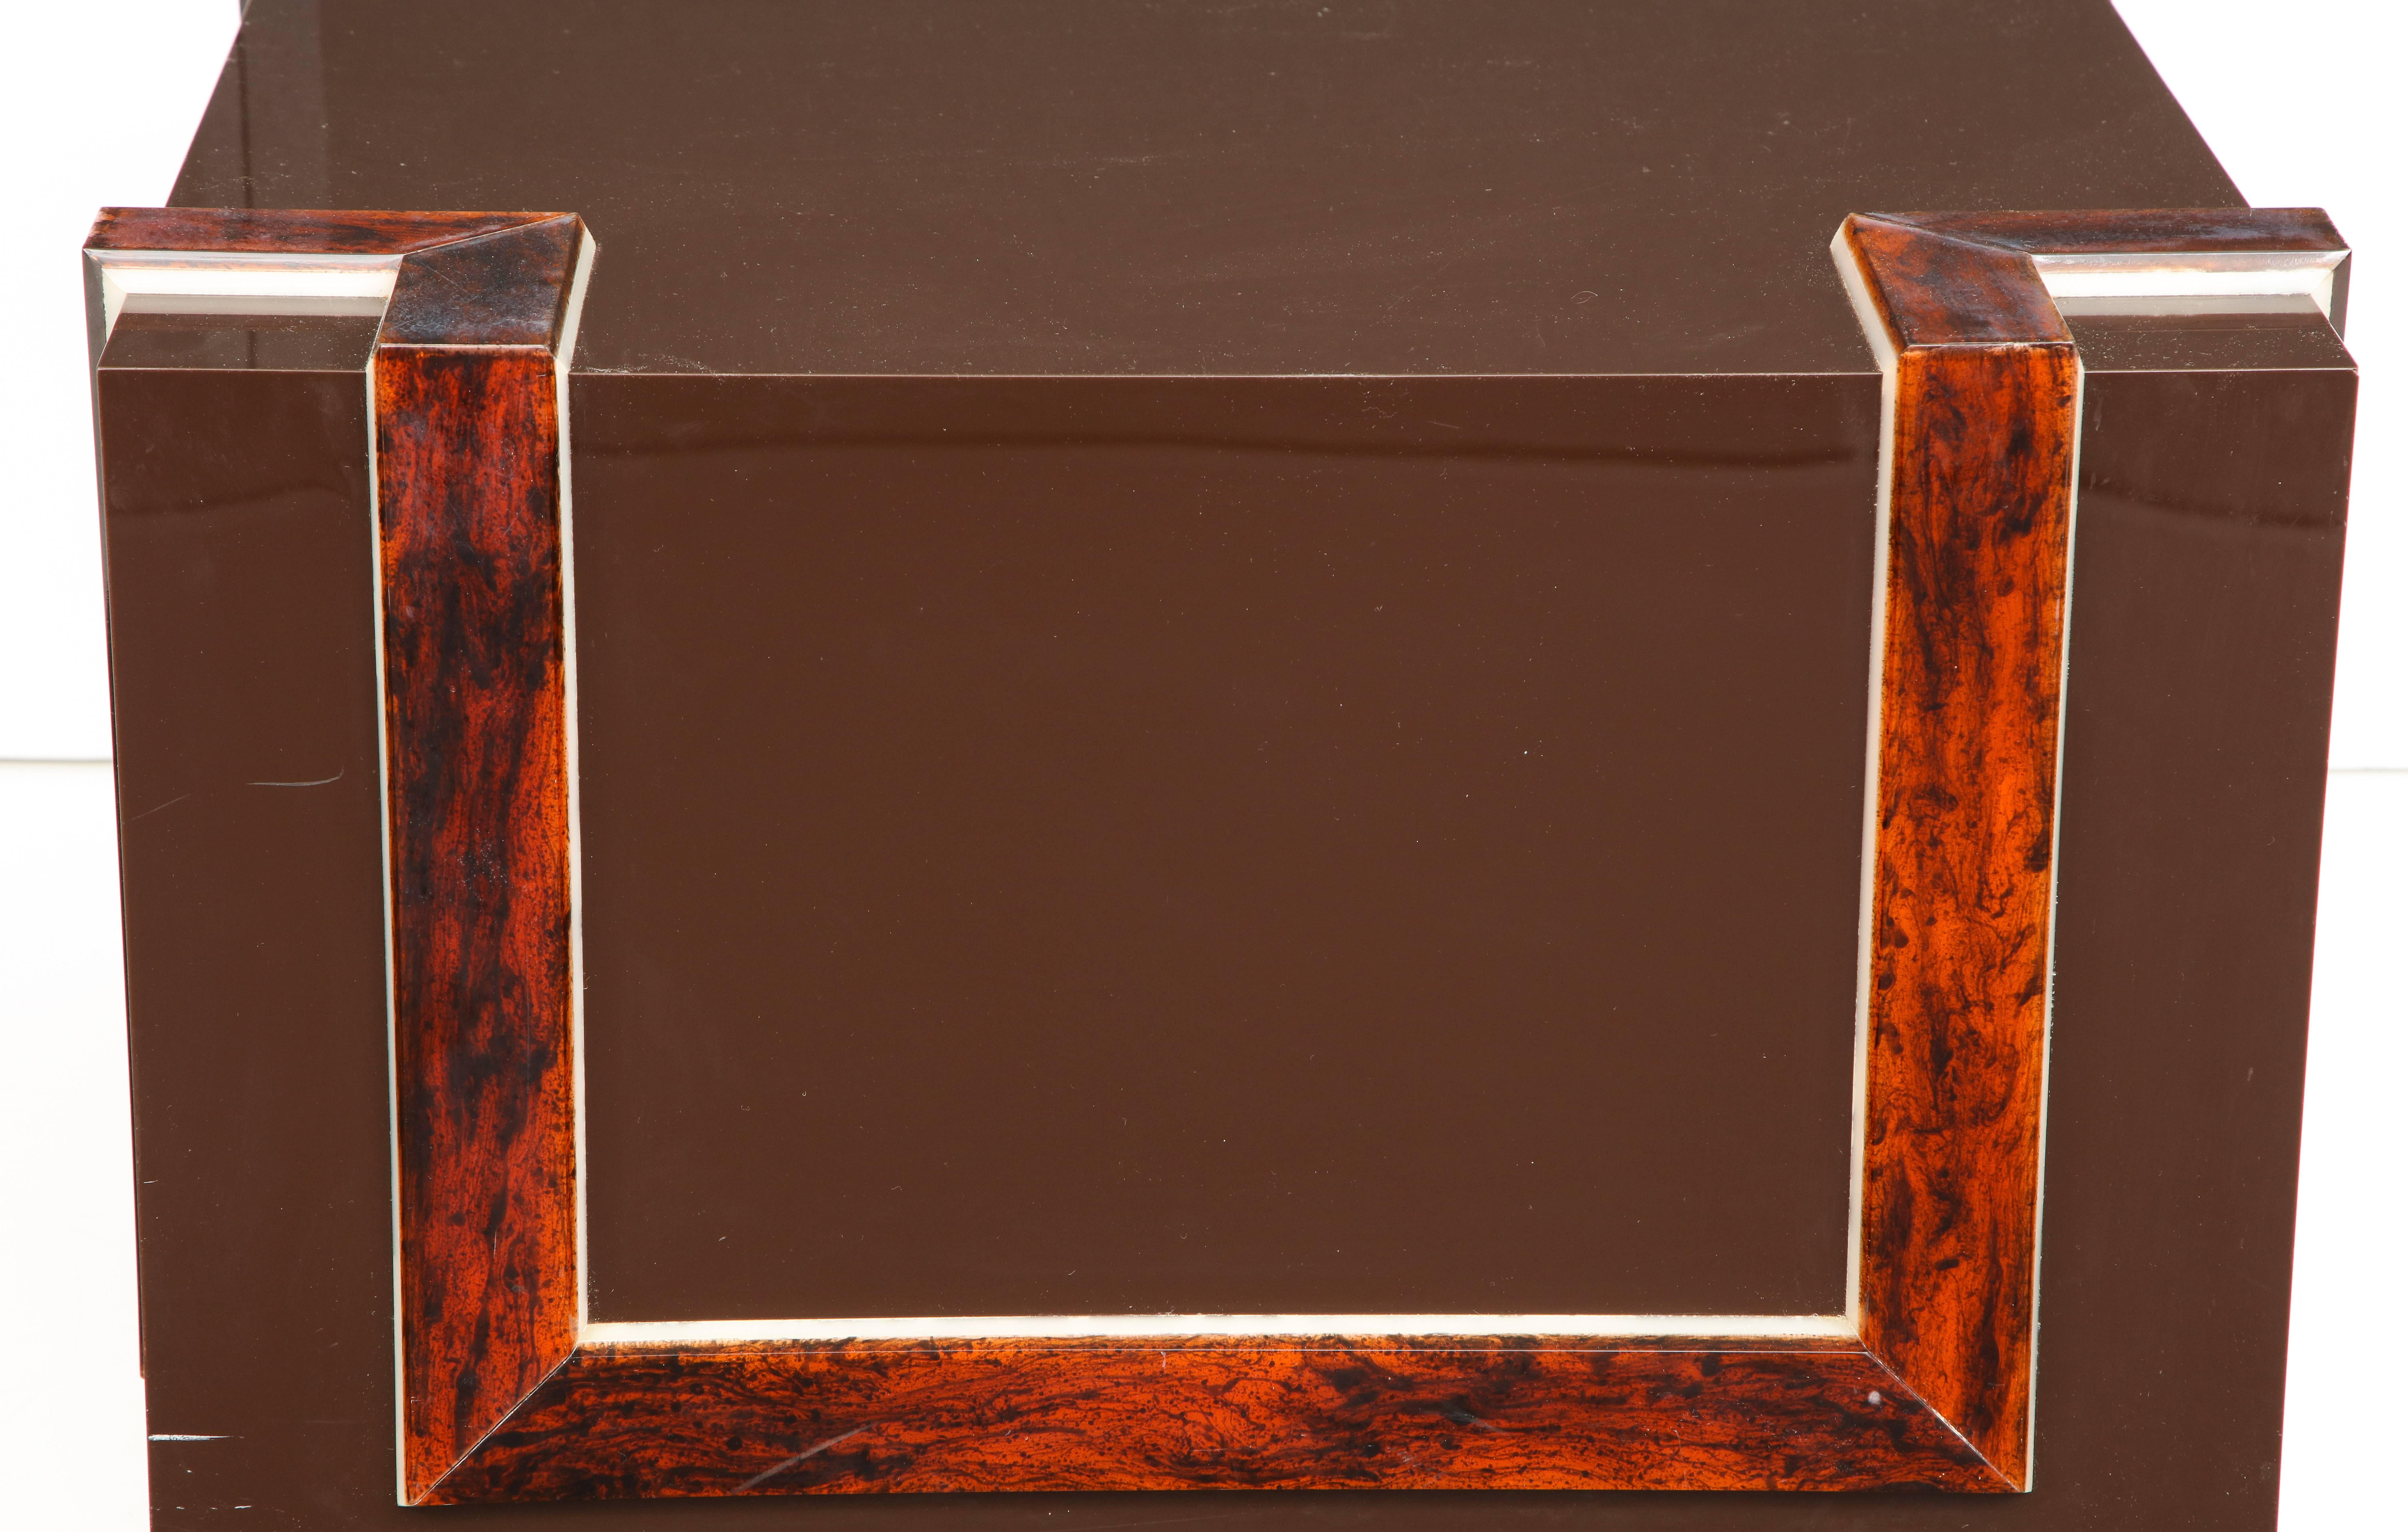 American Modernist Cube Form Cocktail Table with Faux Tortoiseshell Decoration